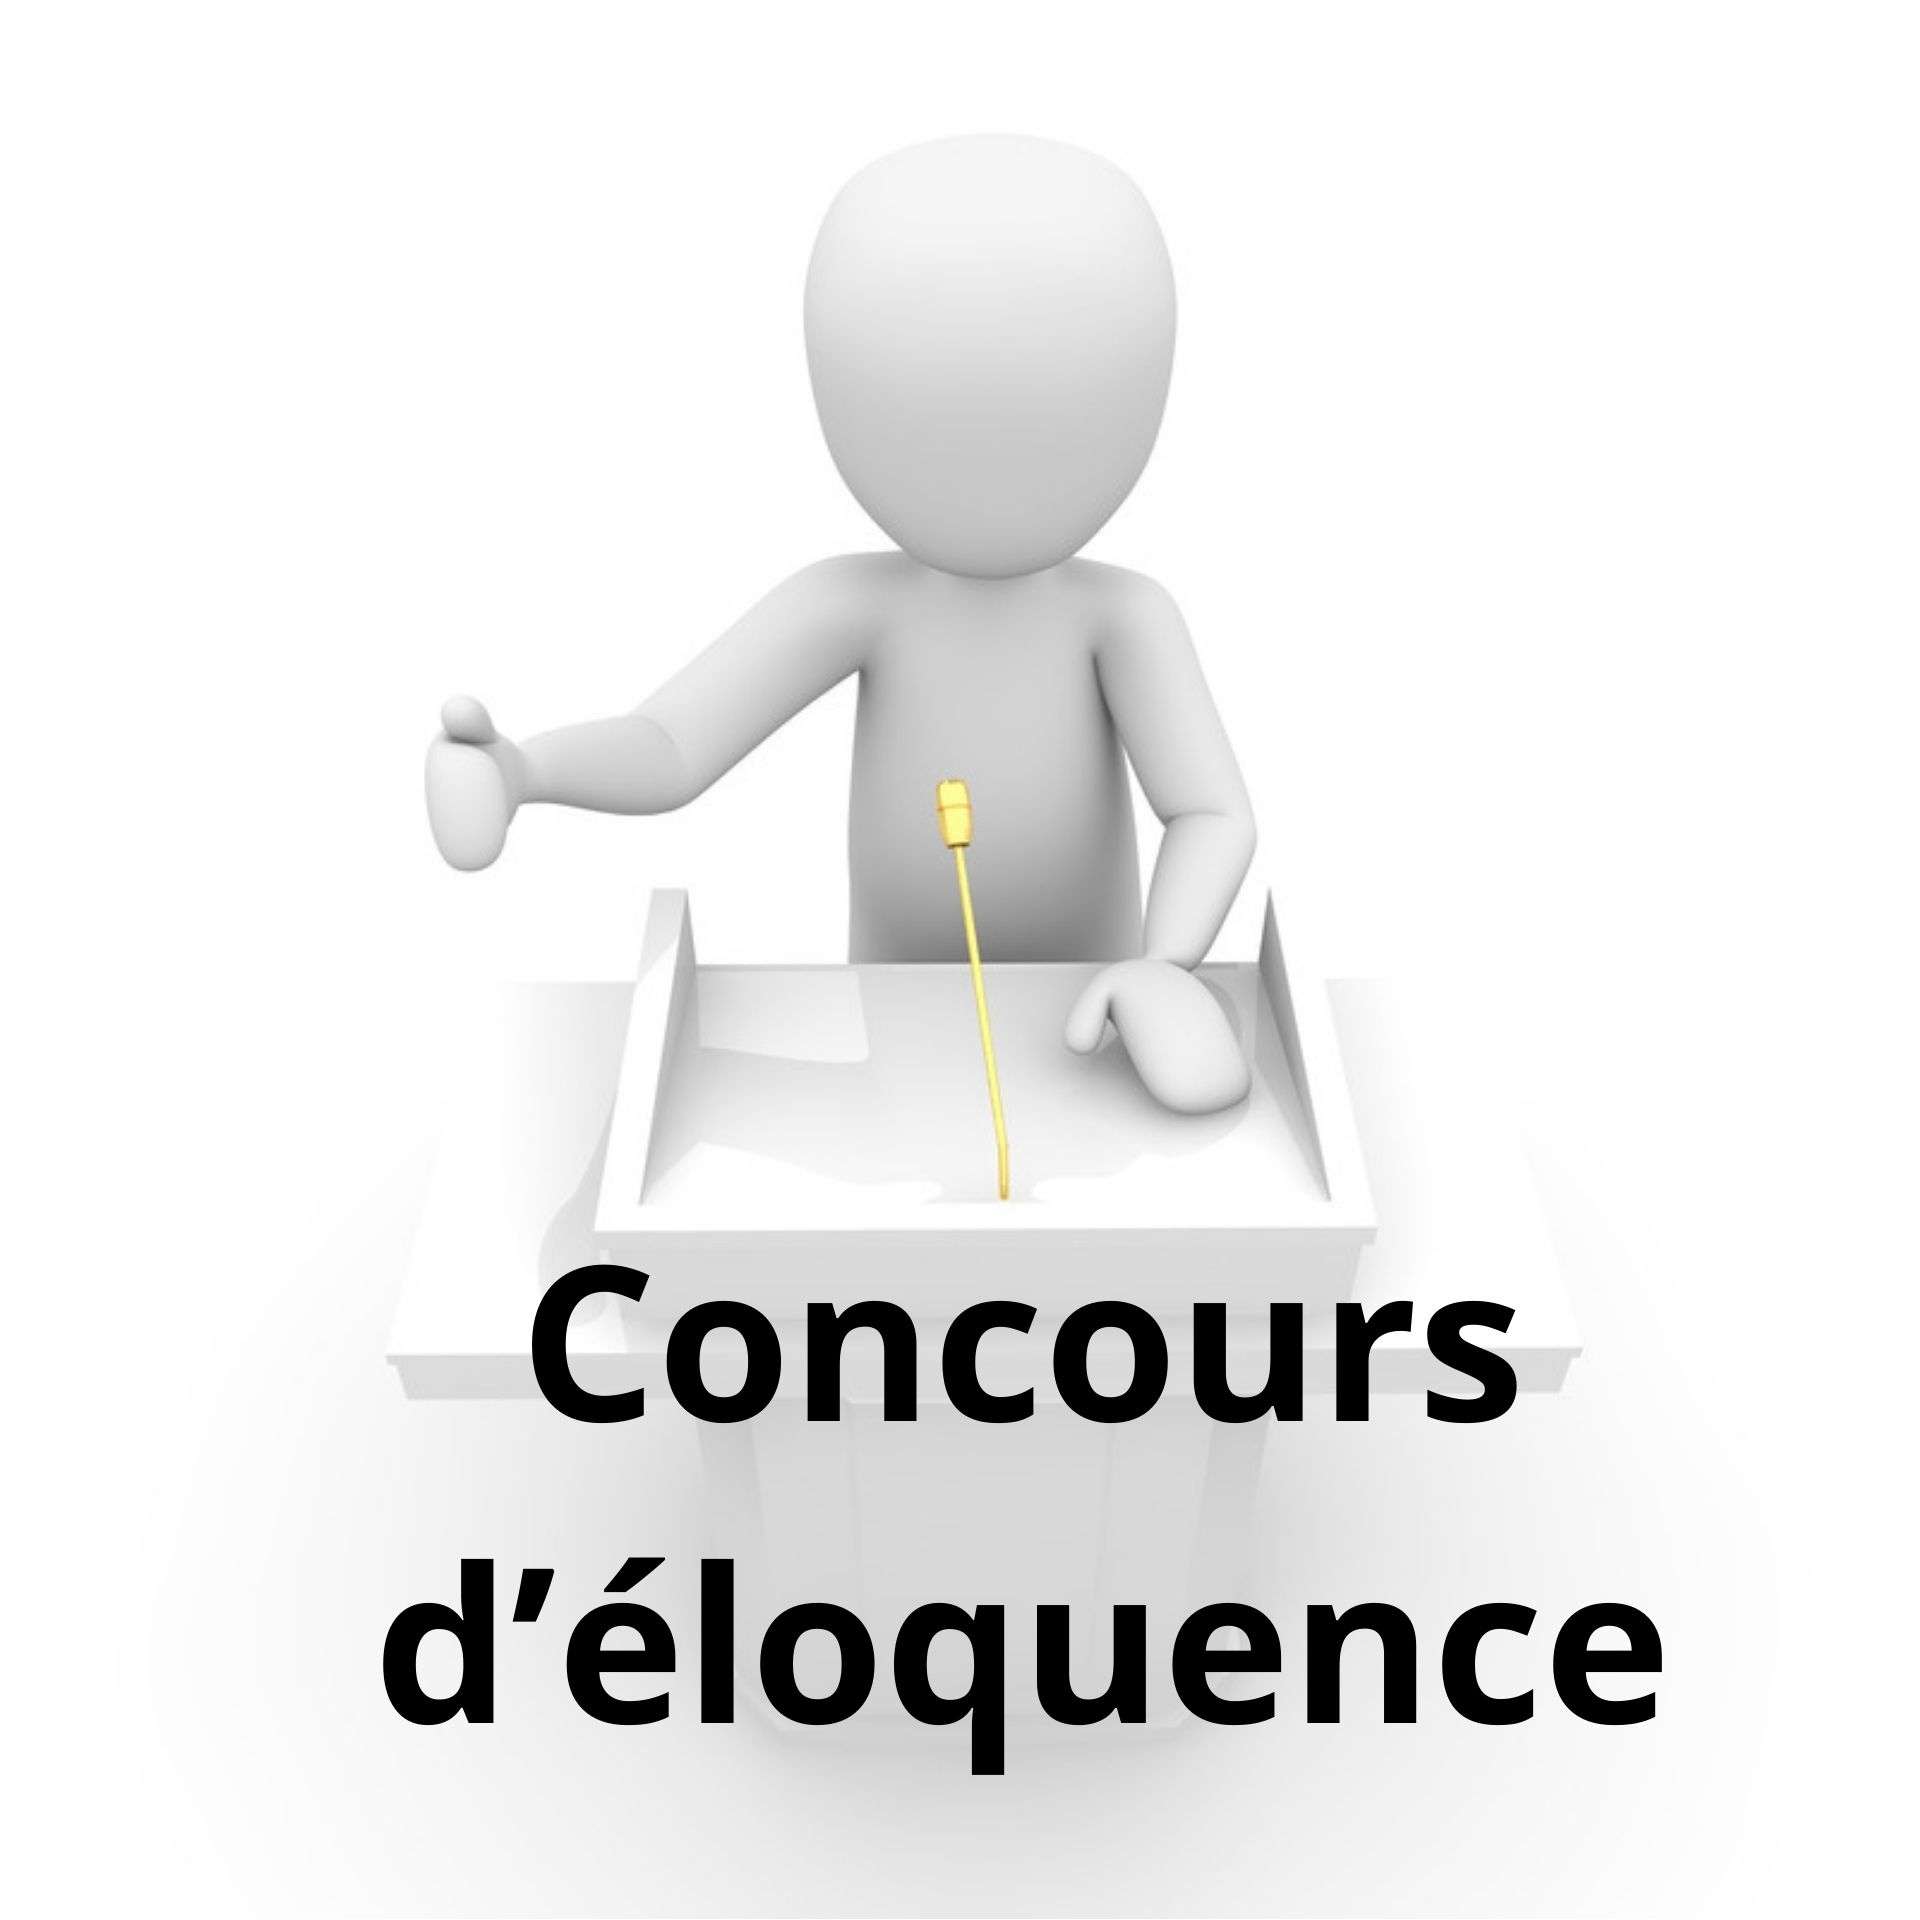 concours_deloquence.jpg